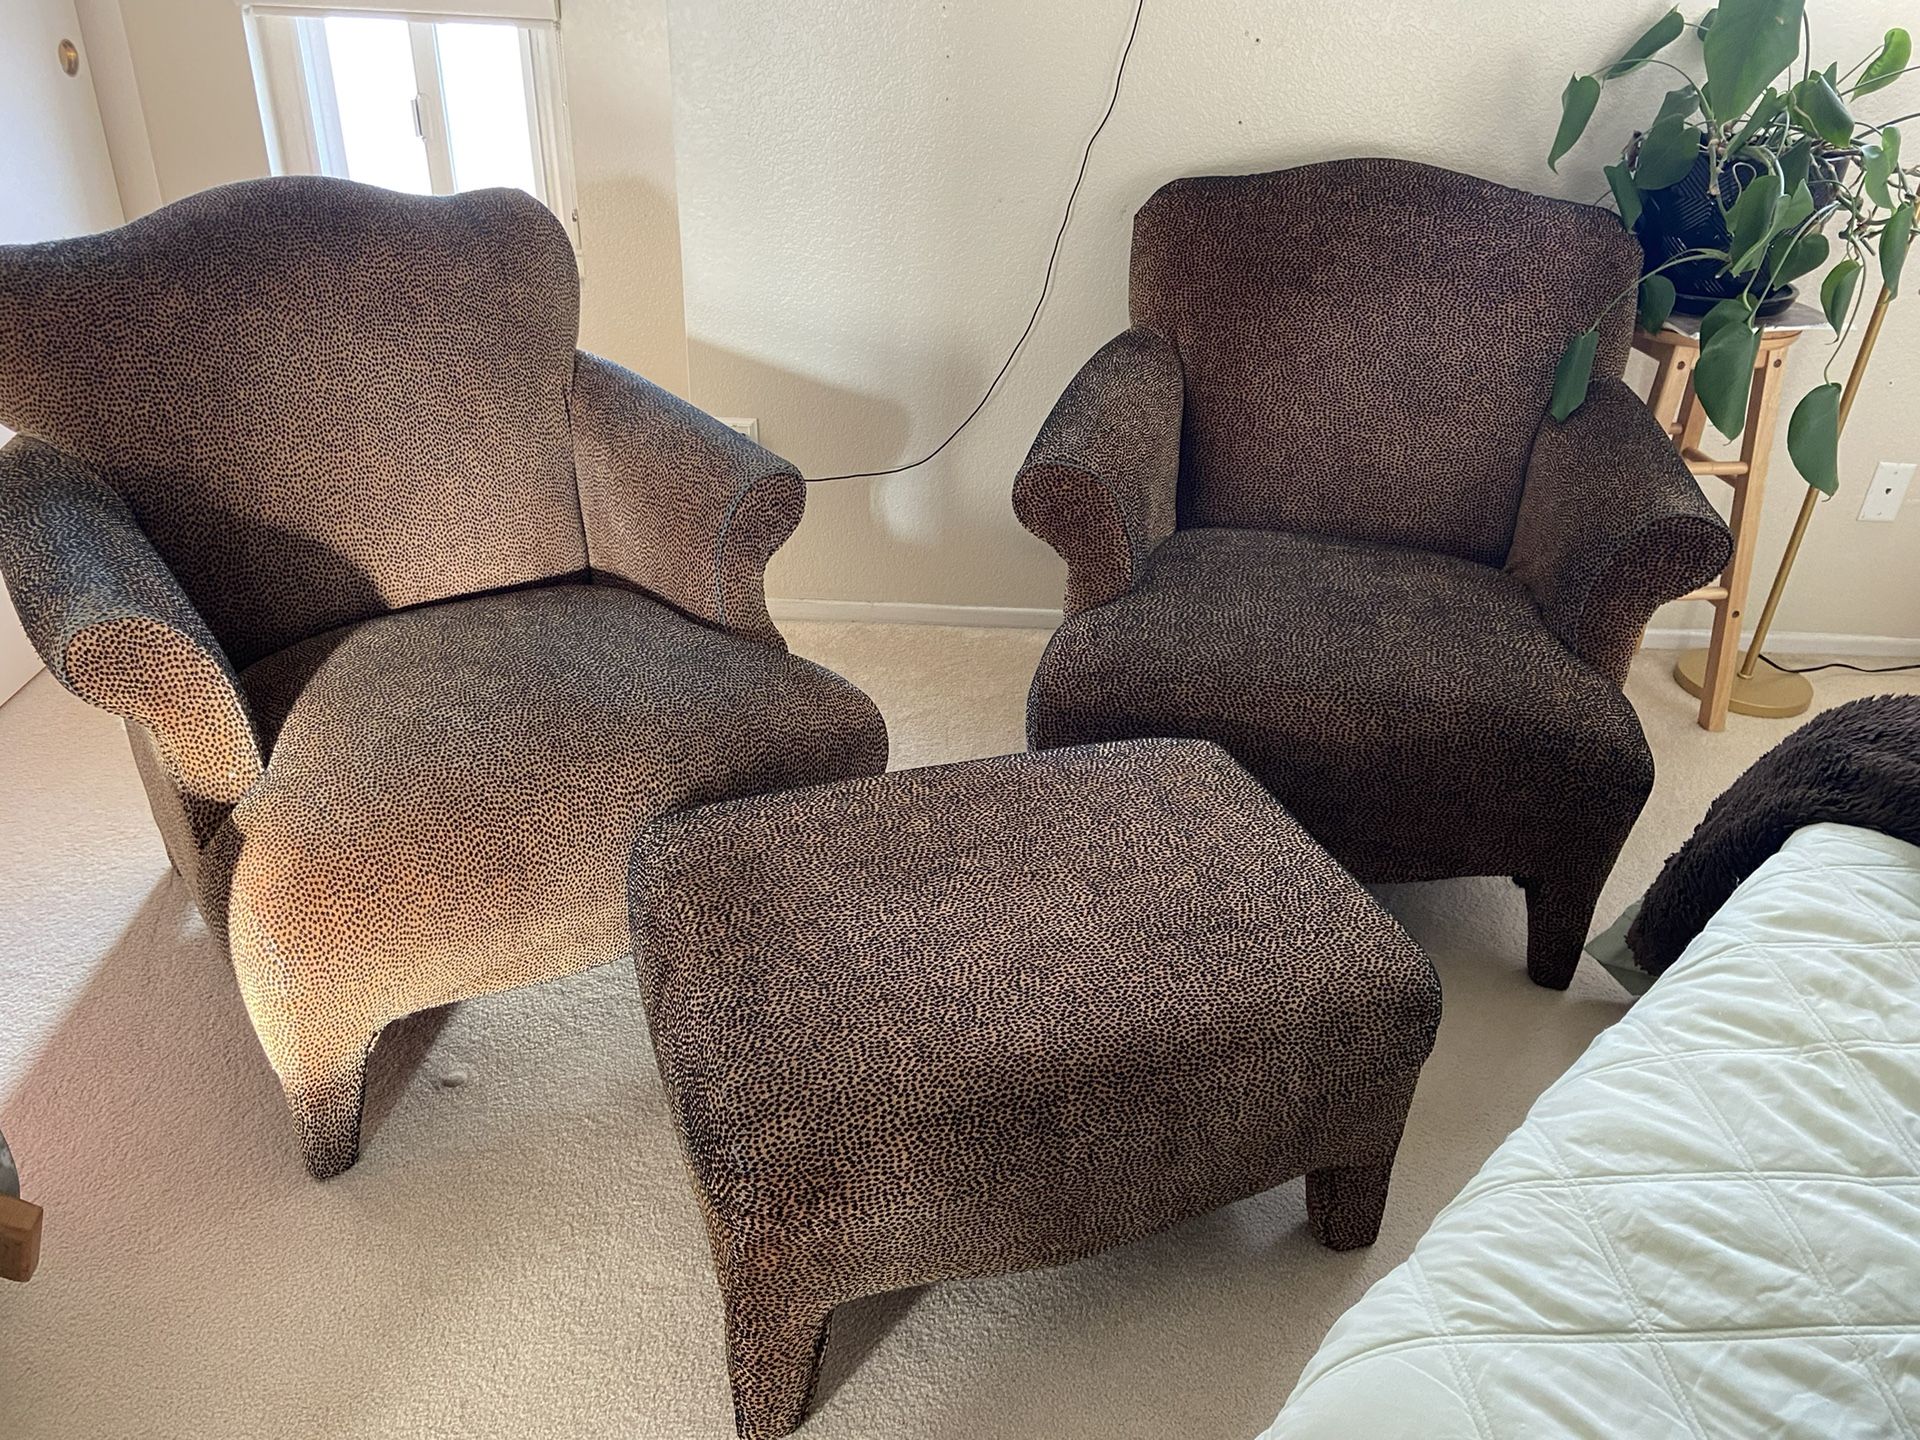 Sofa Chairs With Ottoman, Leopard Print